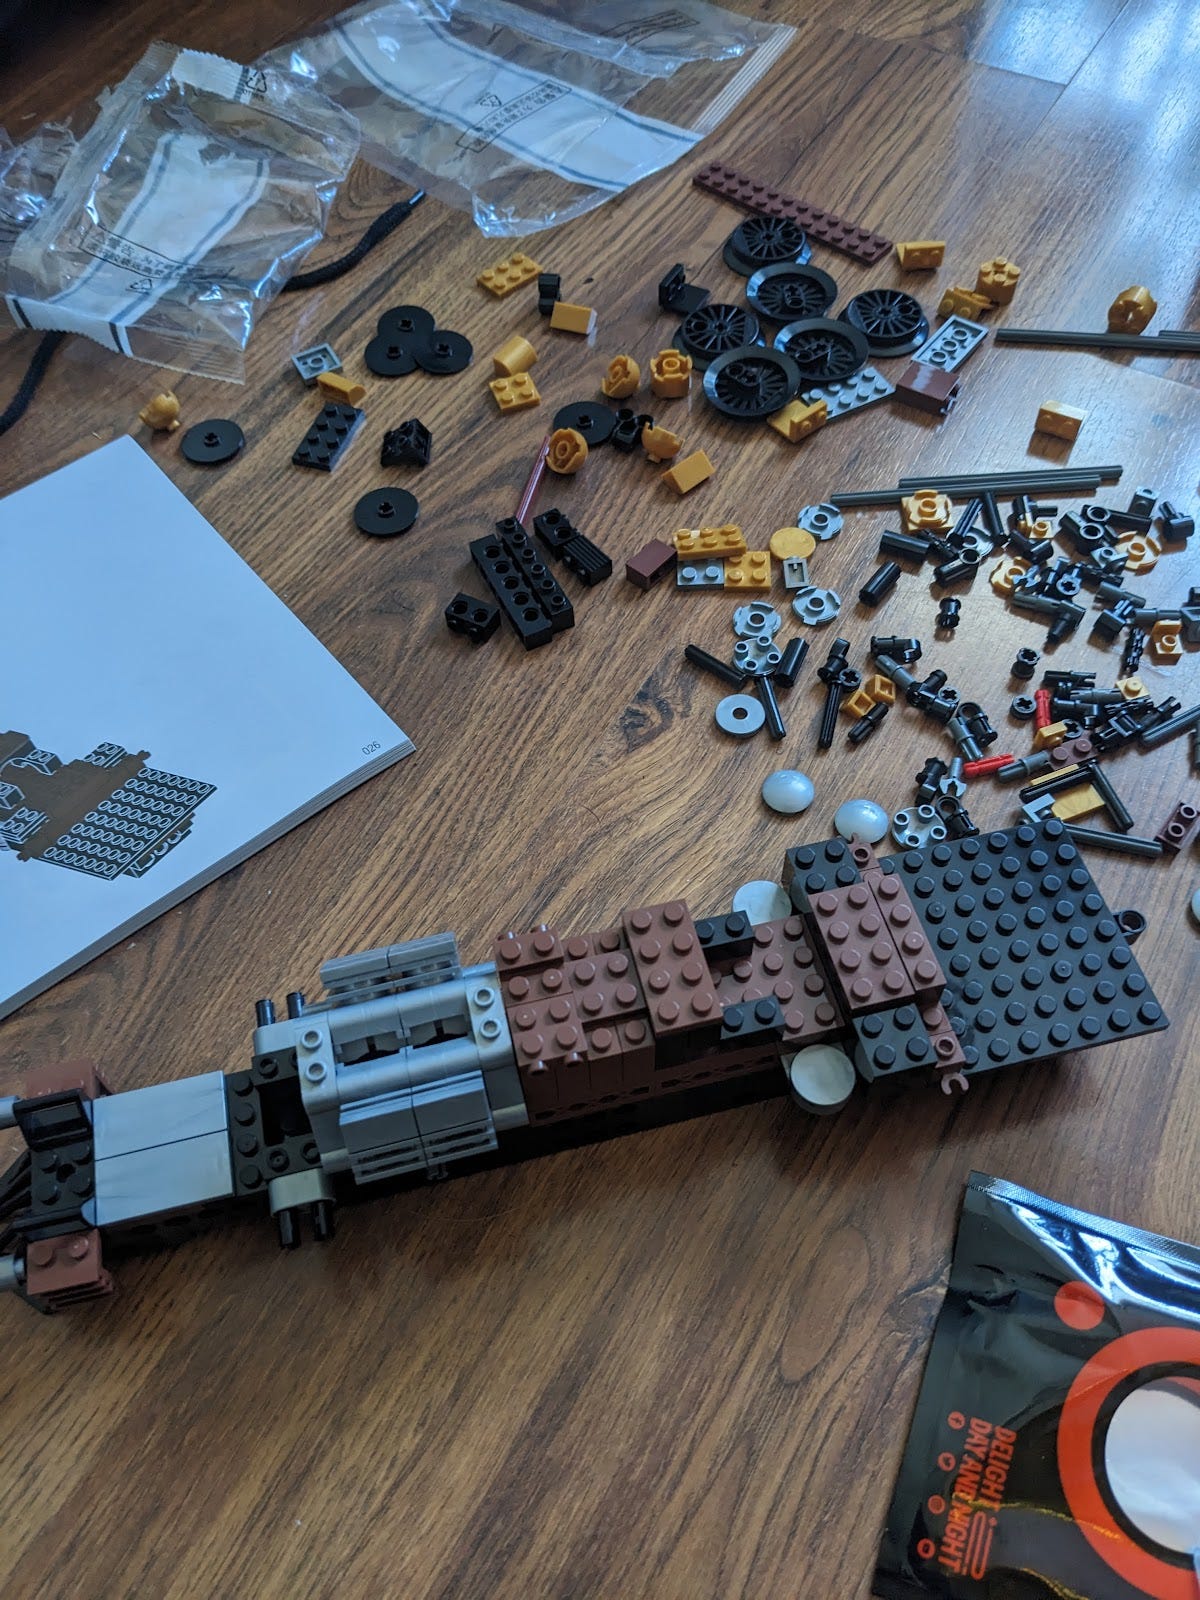 A not yet built offbrand lego train with pieces strewn around the beginnings of the train